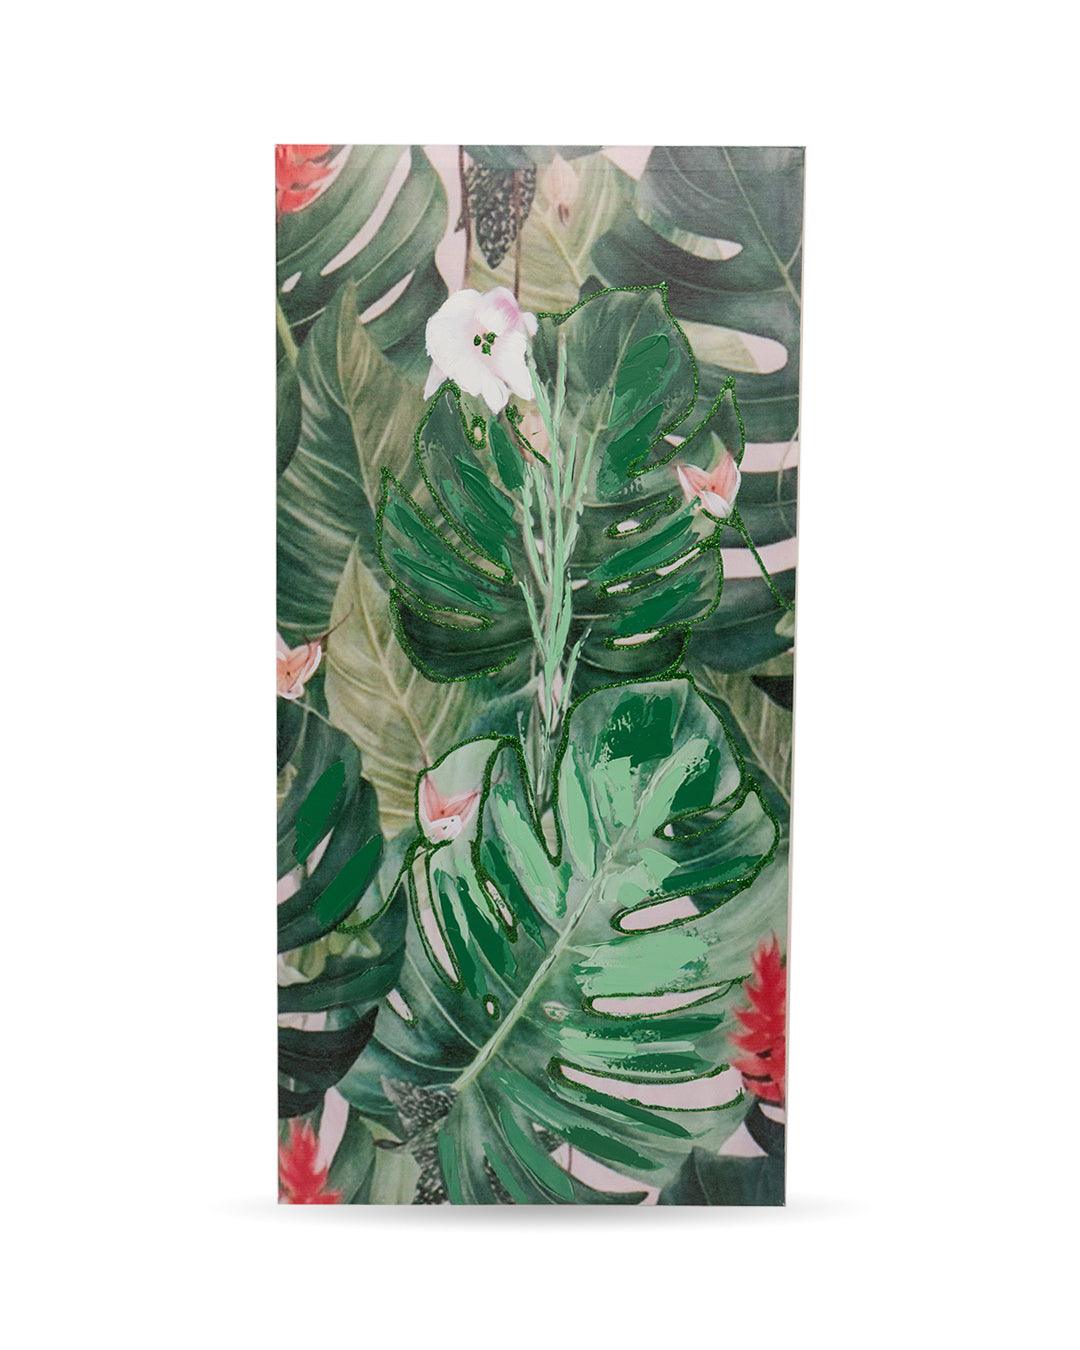 Botanical Hand Made Oil Painting, Gallery Wrapped, Green, Canvas - MARKET 99